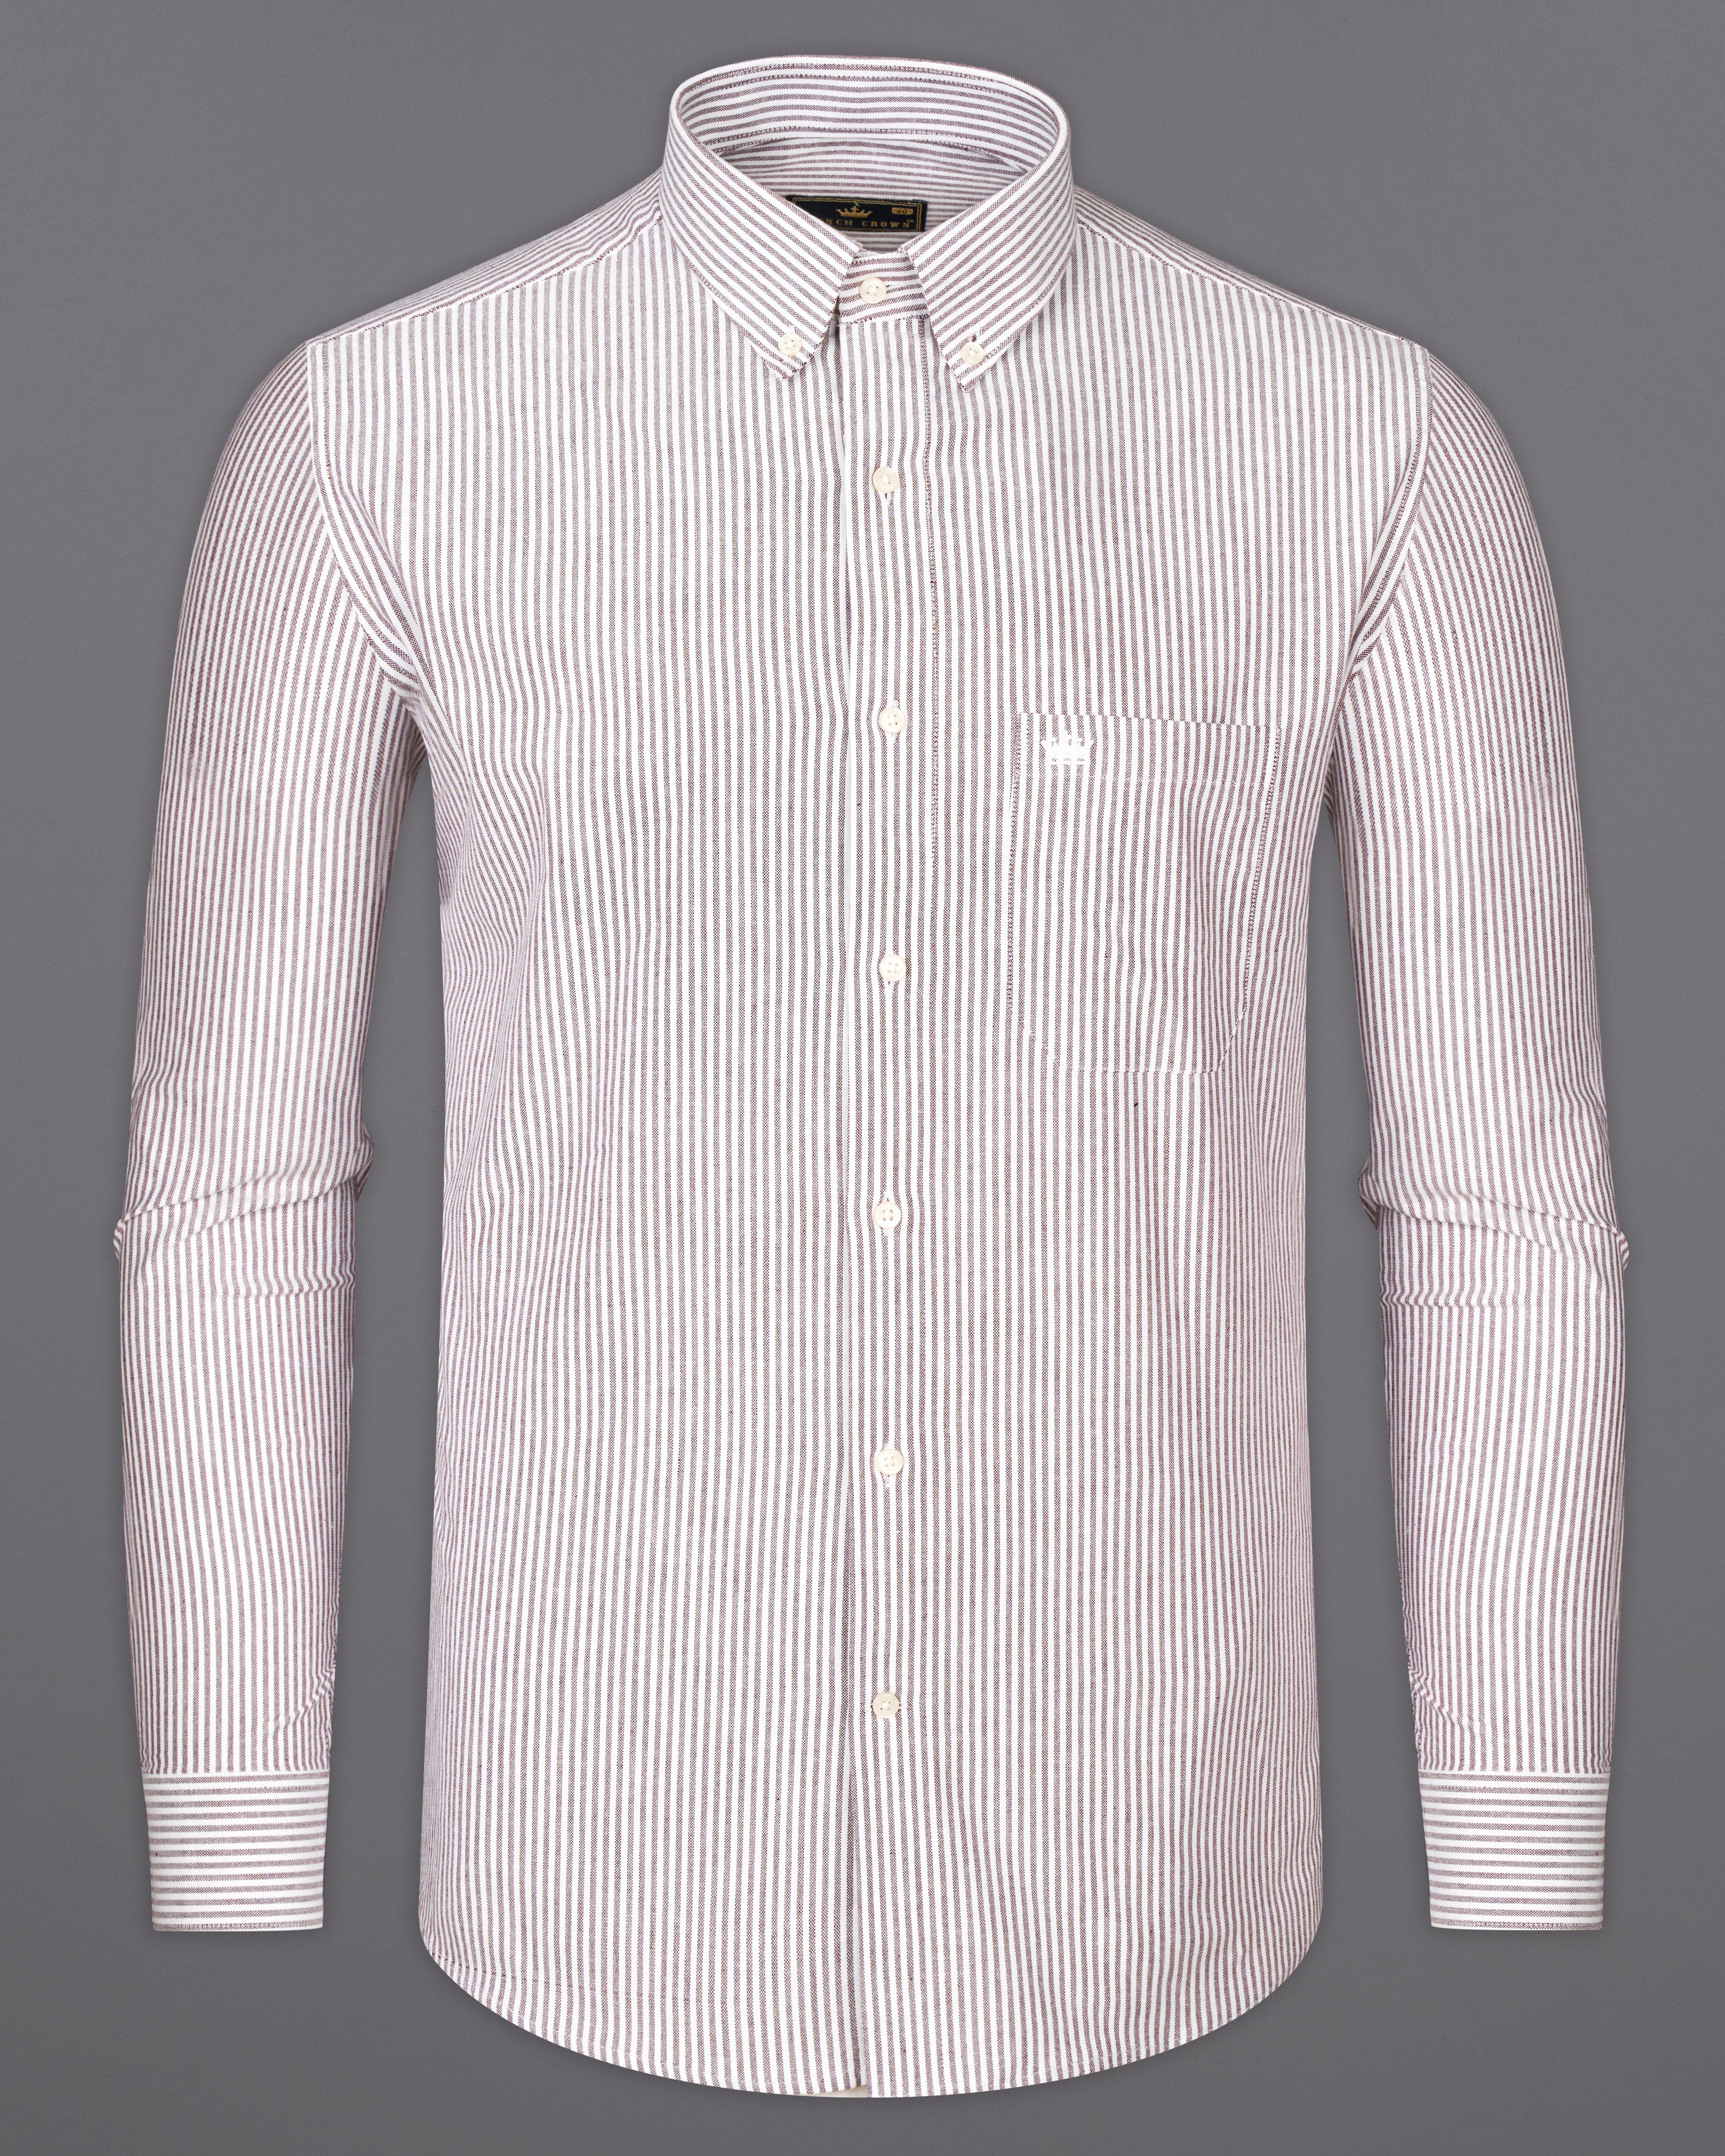 Cafe Noir Brown and White Striped Button Down Royal Oxford Shirt 9725-BD-38, 9725-BD-H-38, 9725-BD-39, 9725-BD-H-39, 9725-BD-40, 9725-BD-H-40, 9725-BD-42, 9725-BD-H-42, 9725-BD-44, 9725-BD-H-44, 9725-BD-46, 9725-BD-H-46, 9725-BD-48, 9725-BD-H-48, 9725-BD-50, 9725-BD-H-50, 9725-BD-52, 9725-BD-H-52